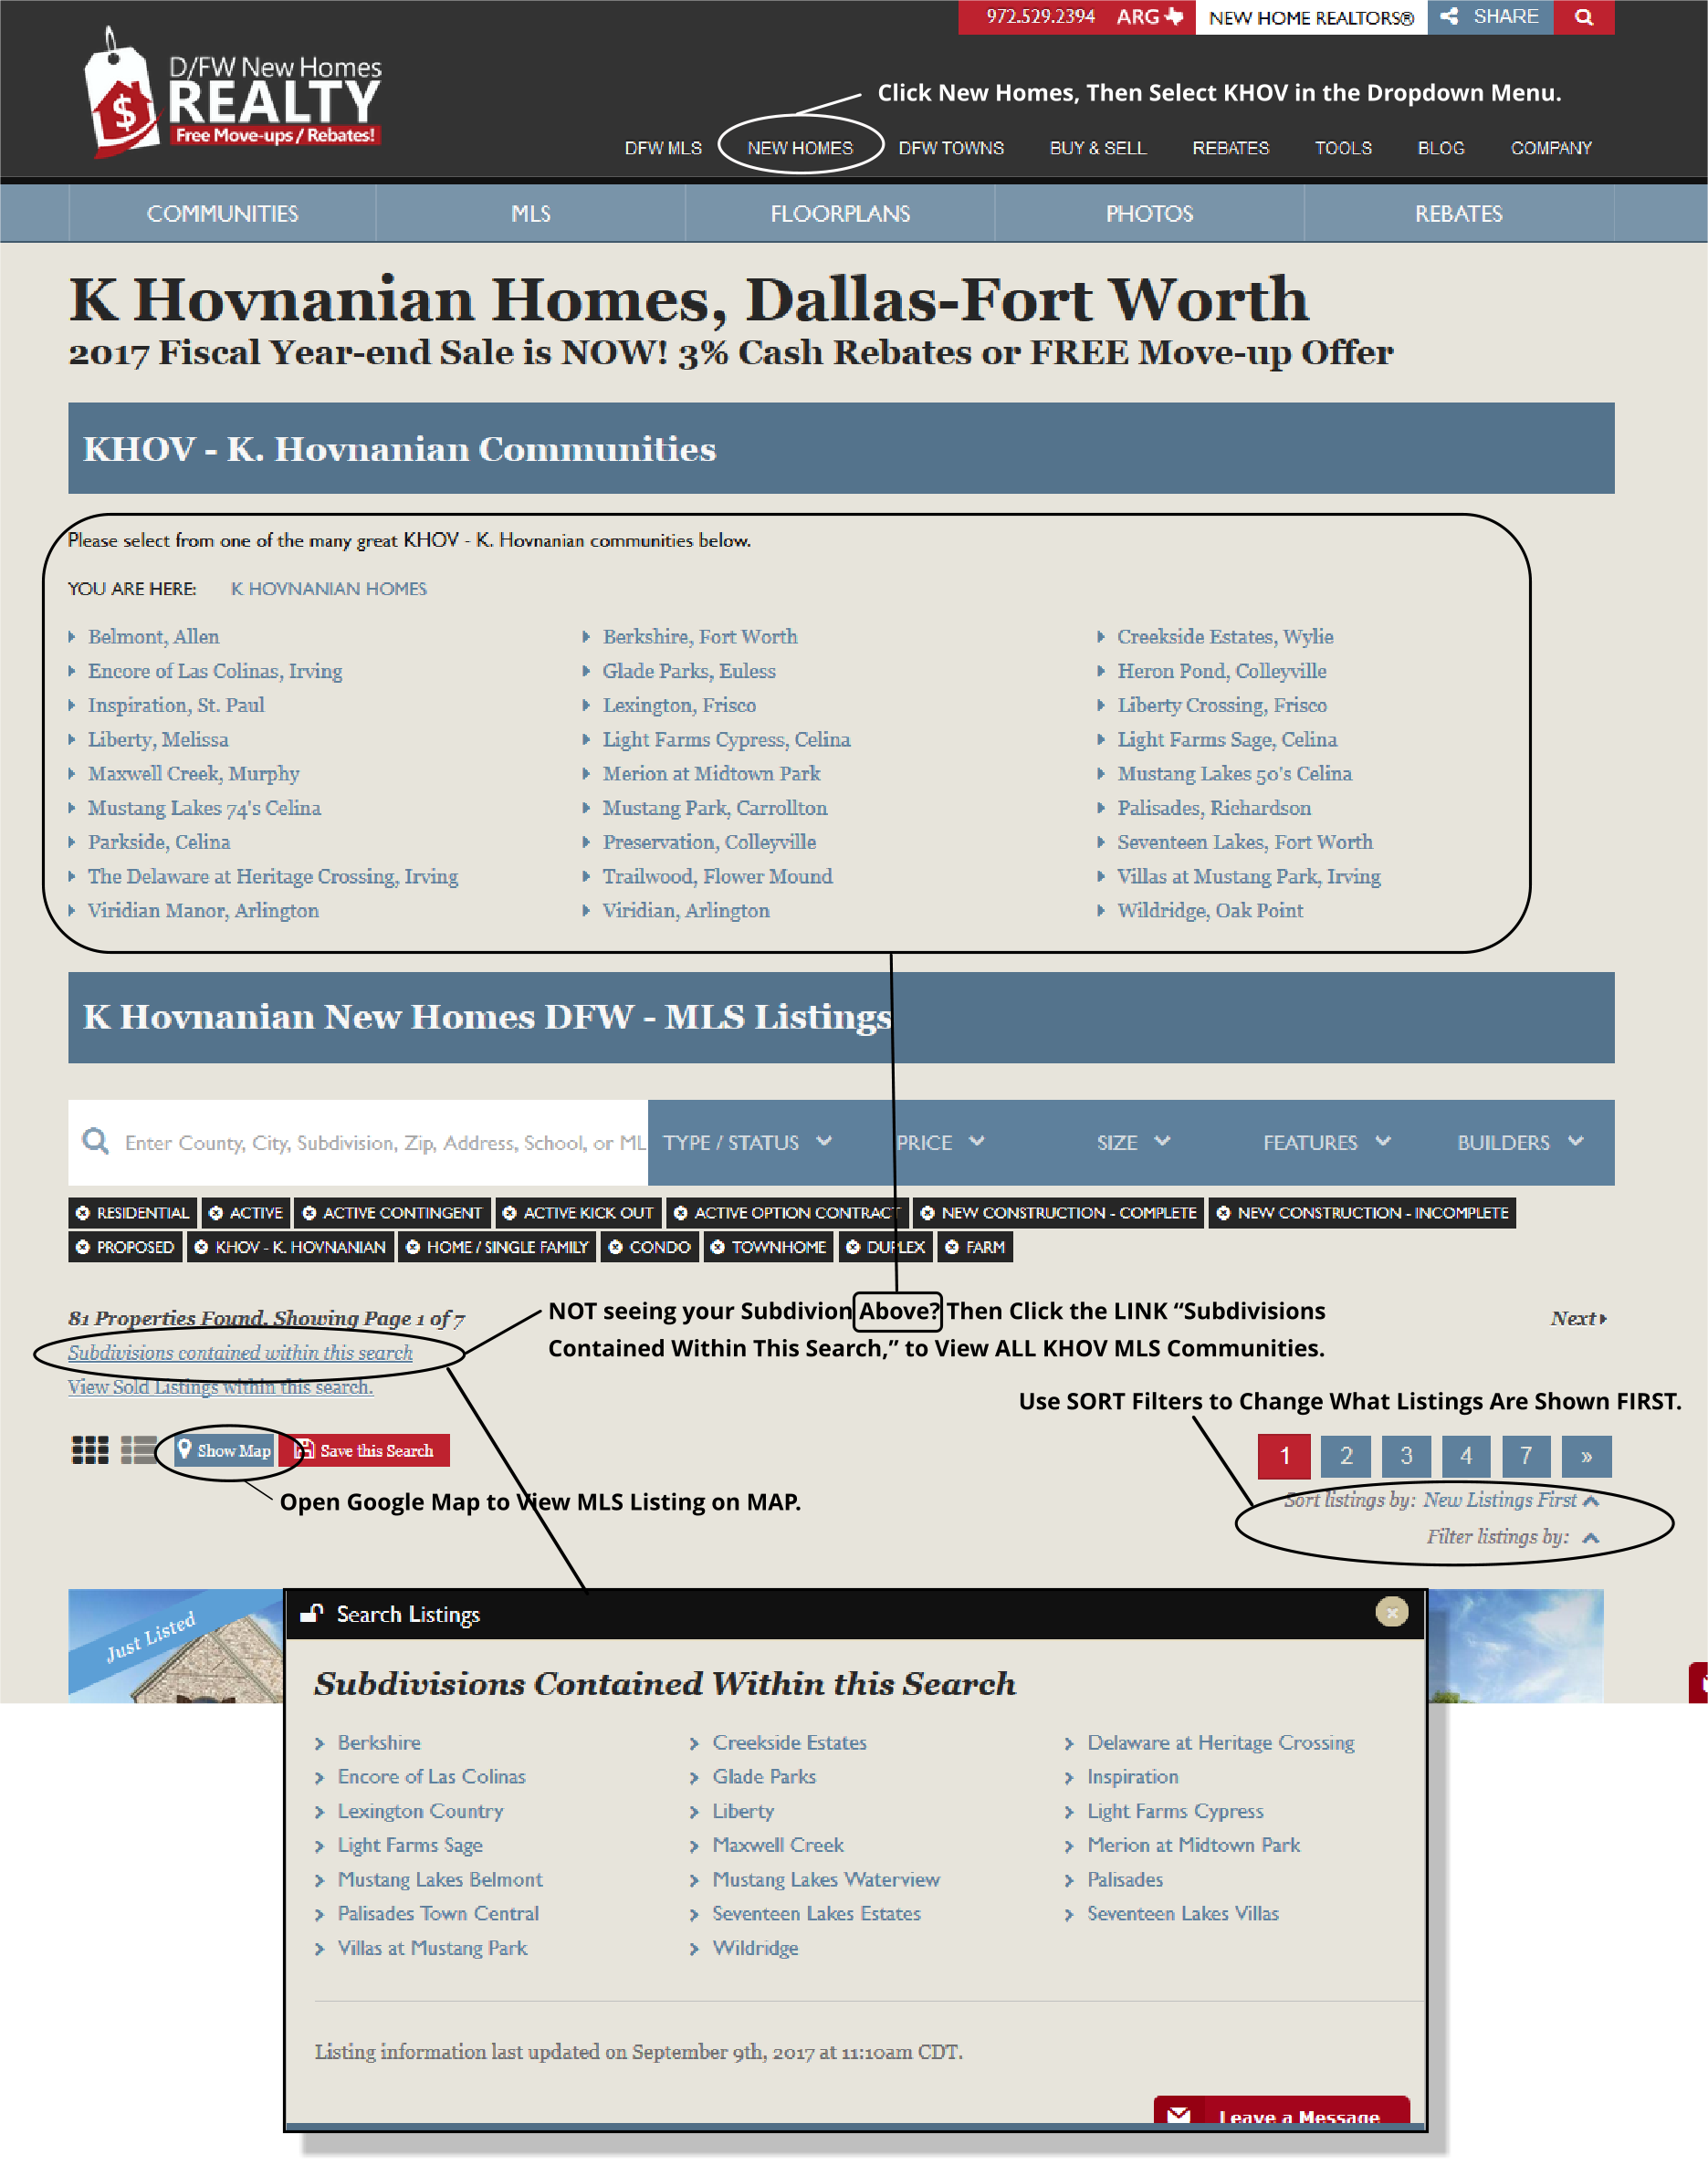 how to find all KHOV Communities or Subdivisions in DFW MLS on this website